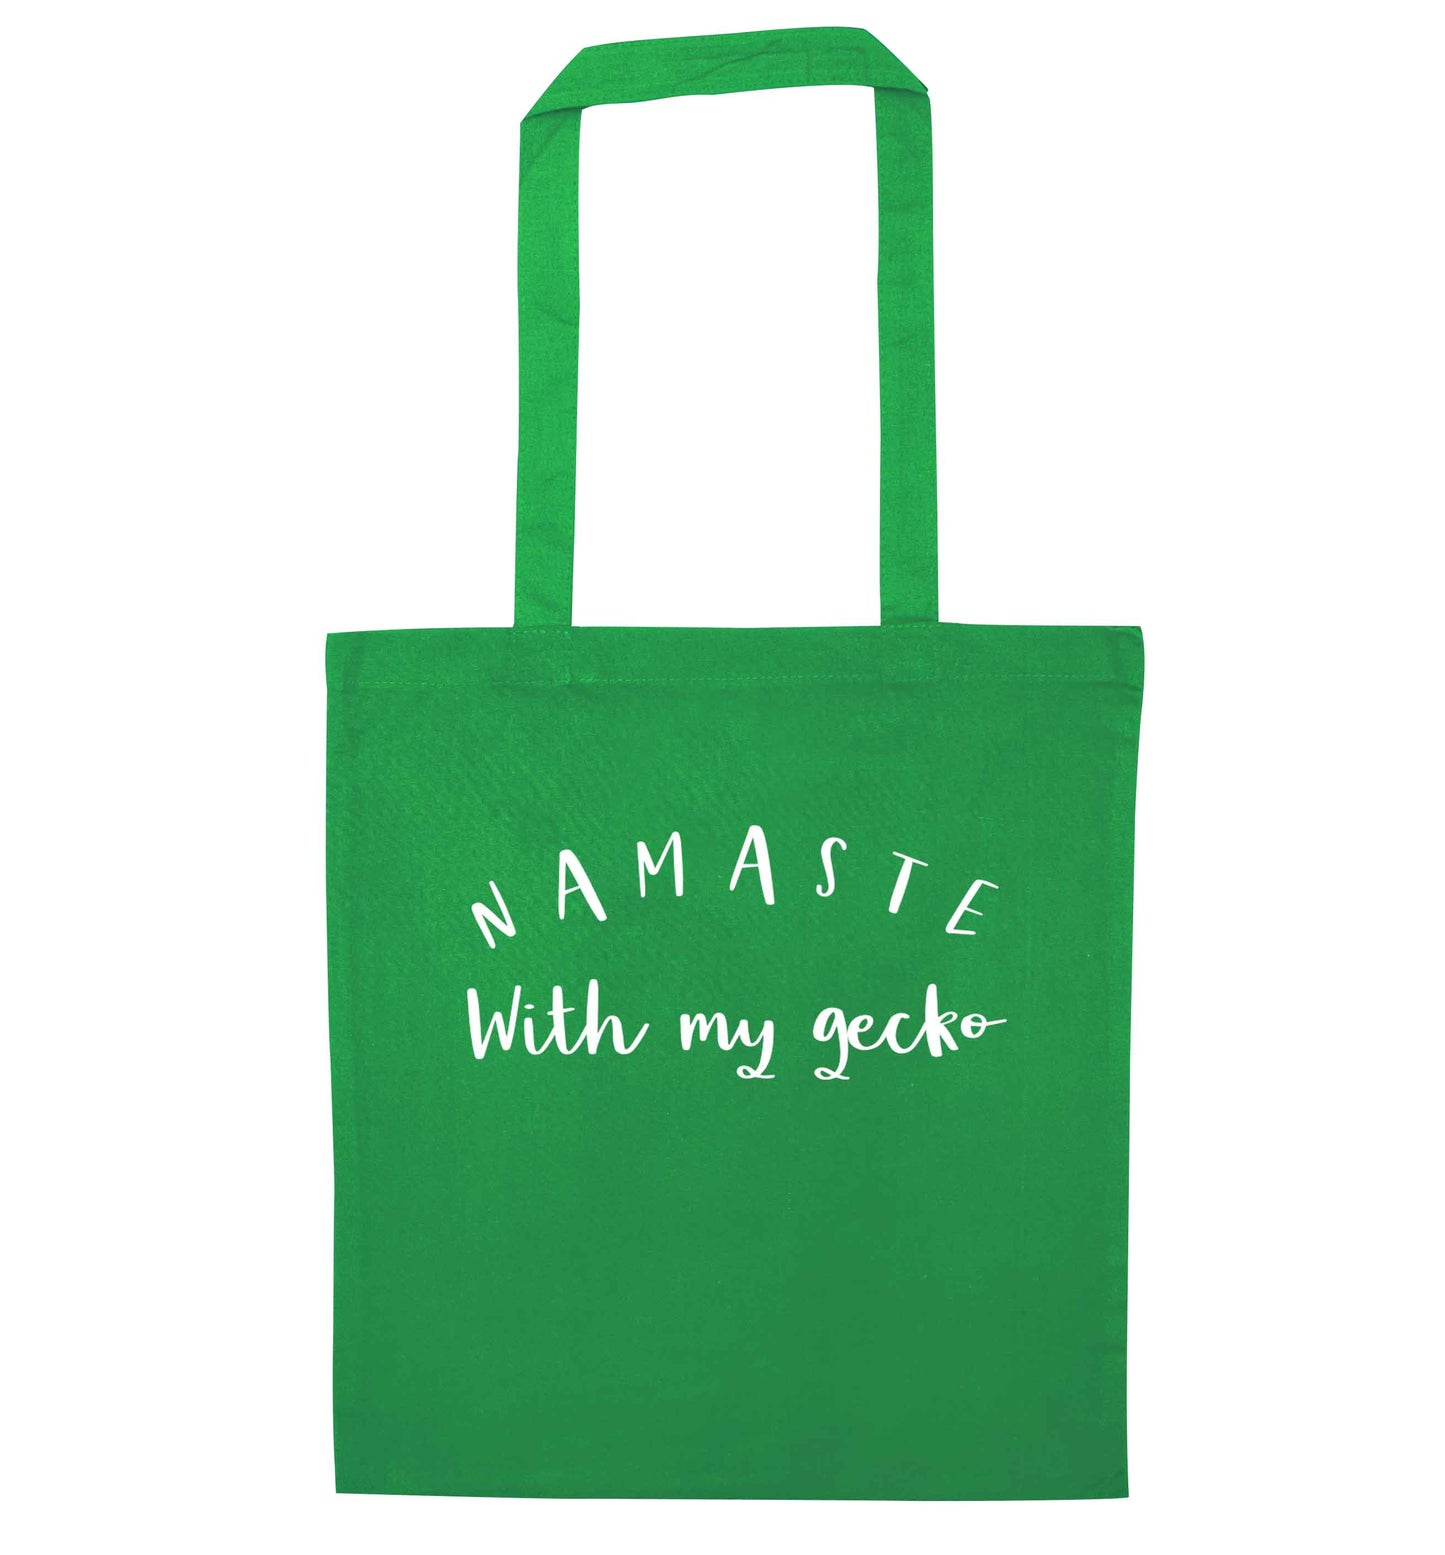 Namaste with my gecko green tote bag